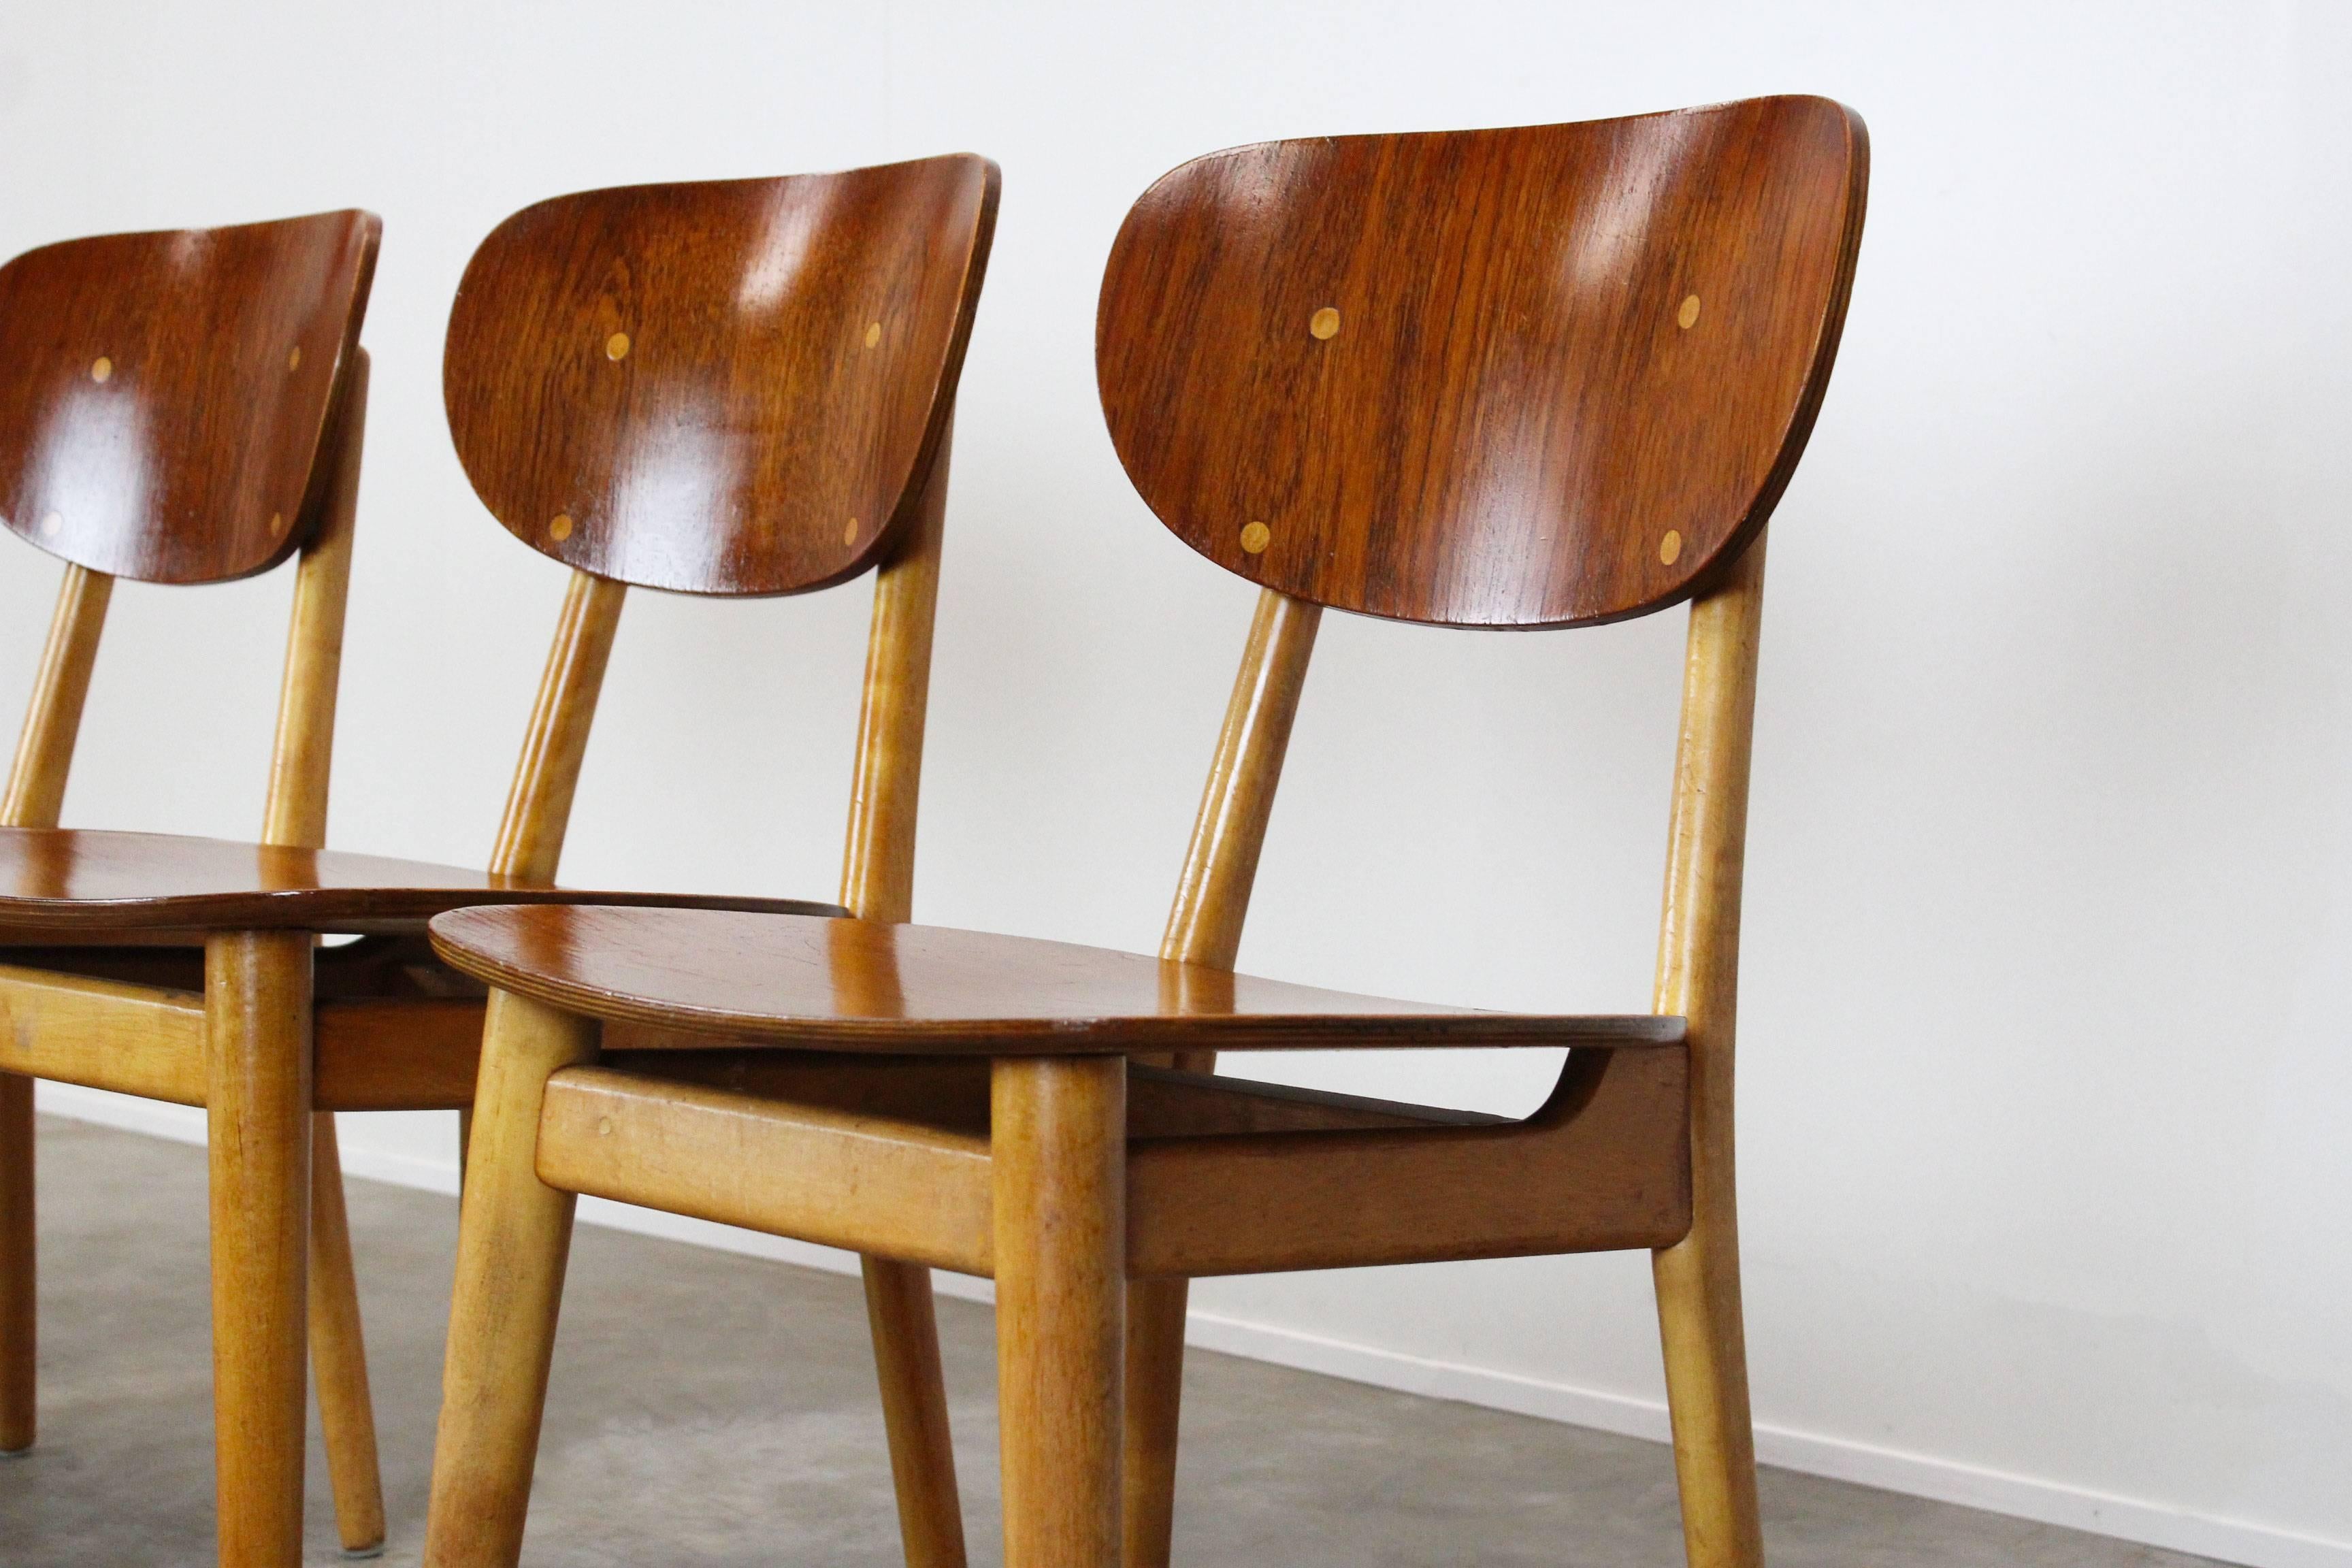 Set of four dining chairs model SB-11 designed by Cees Braakman for Pastoe, 1950 combex series. This model is harder to find then the SB13 model. Wonderful combination of beech and teak wood. Very comfortable dining chairs. Some sings of use on the